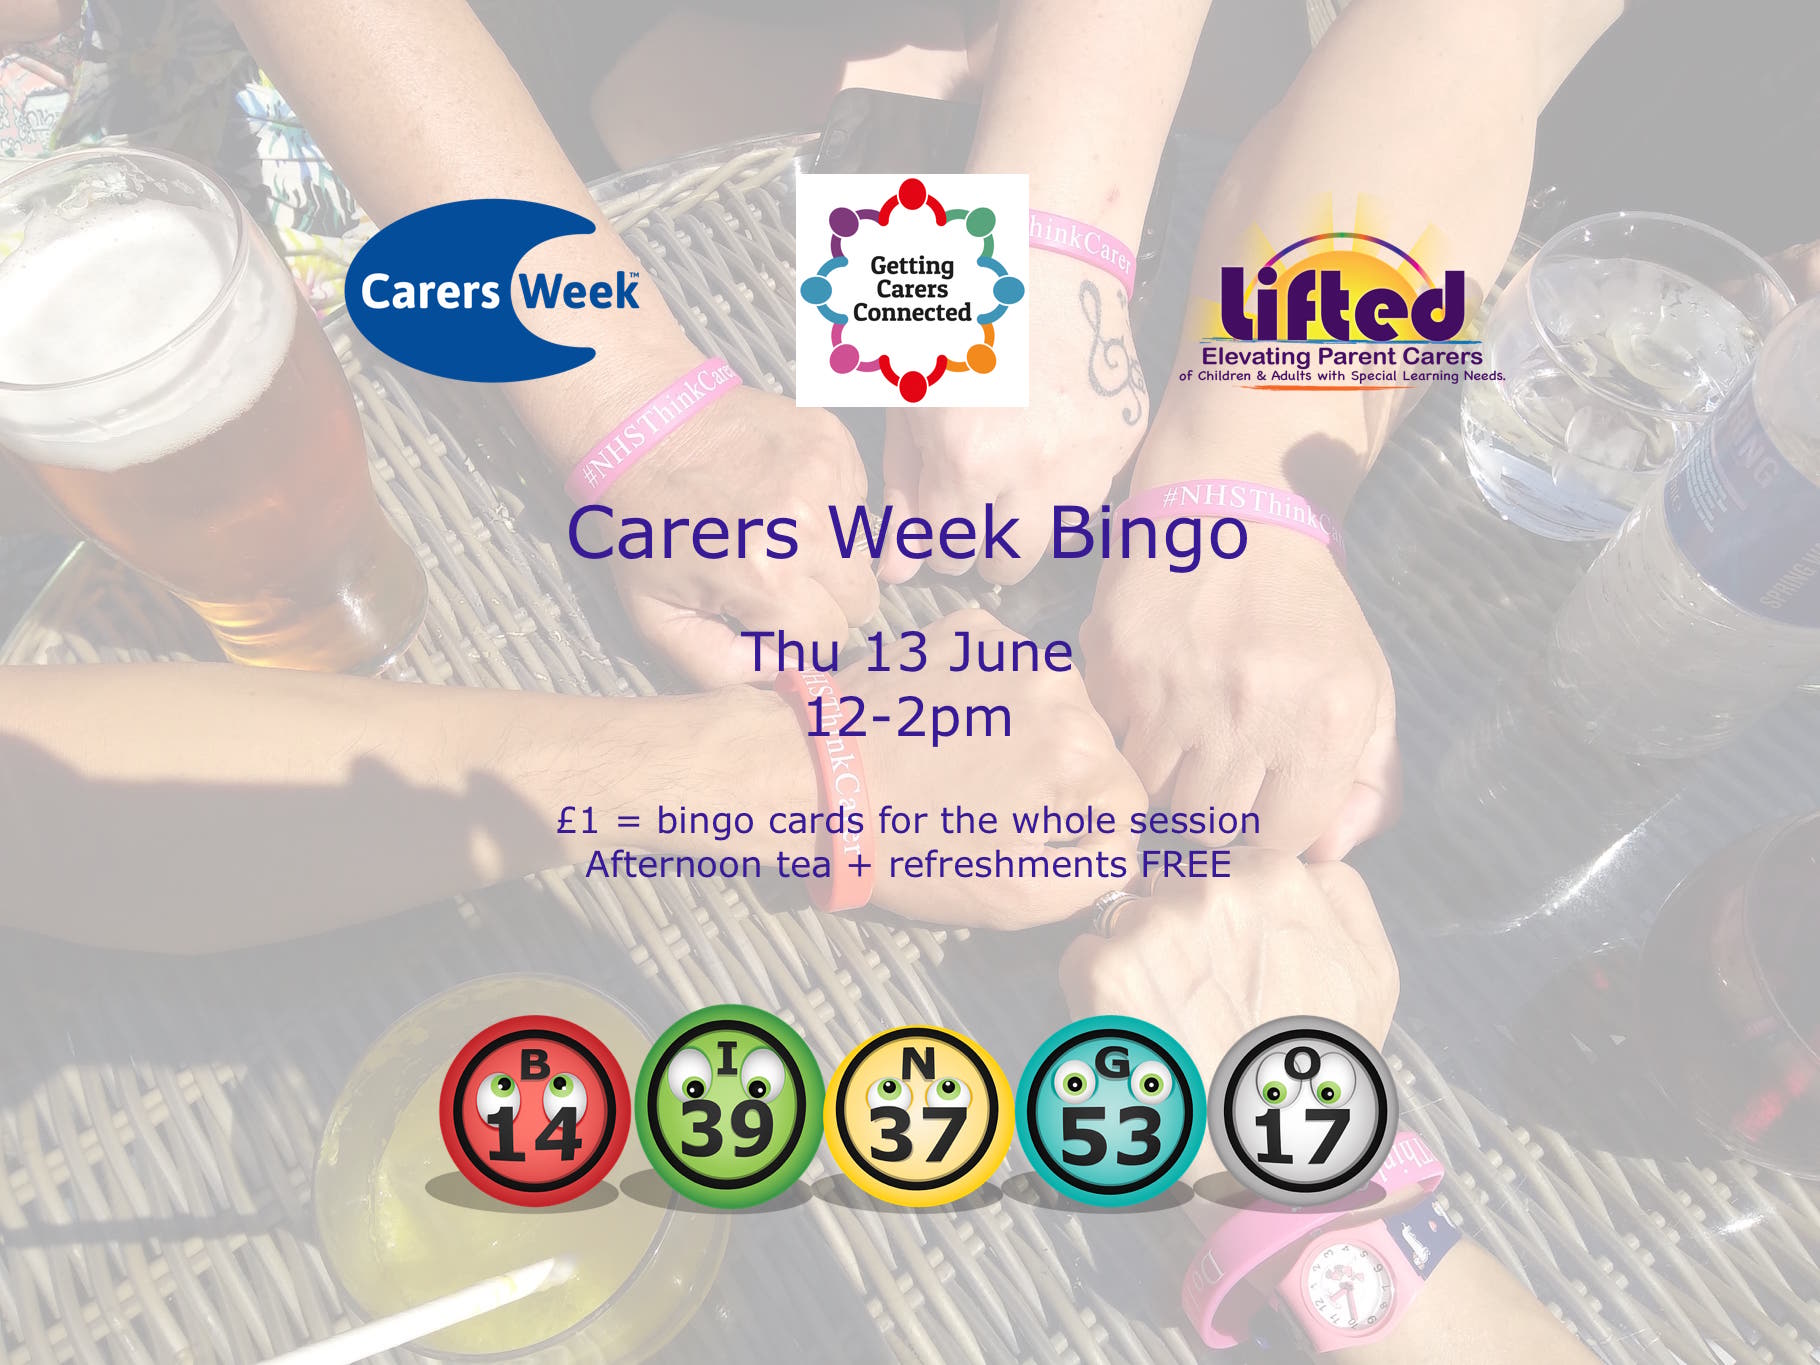 Poster for Lifted's Carers Week Bingo 2019, showing details of the day and some logos on the foreground over 5 carers' hands wearing #NHSThinkCarer wristbands in the background | Carers Week logos via carersweek.org